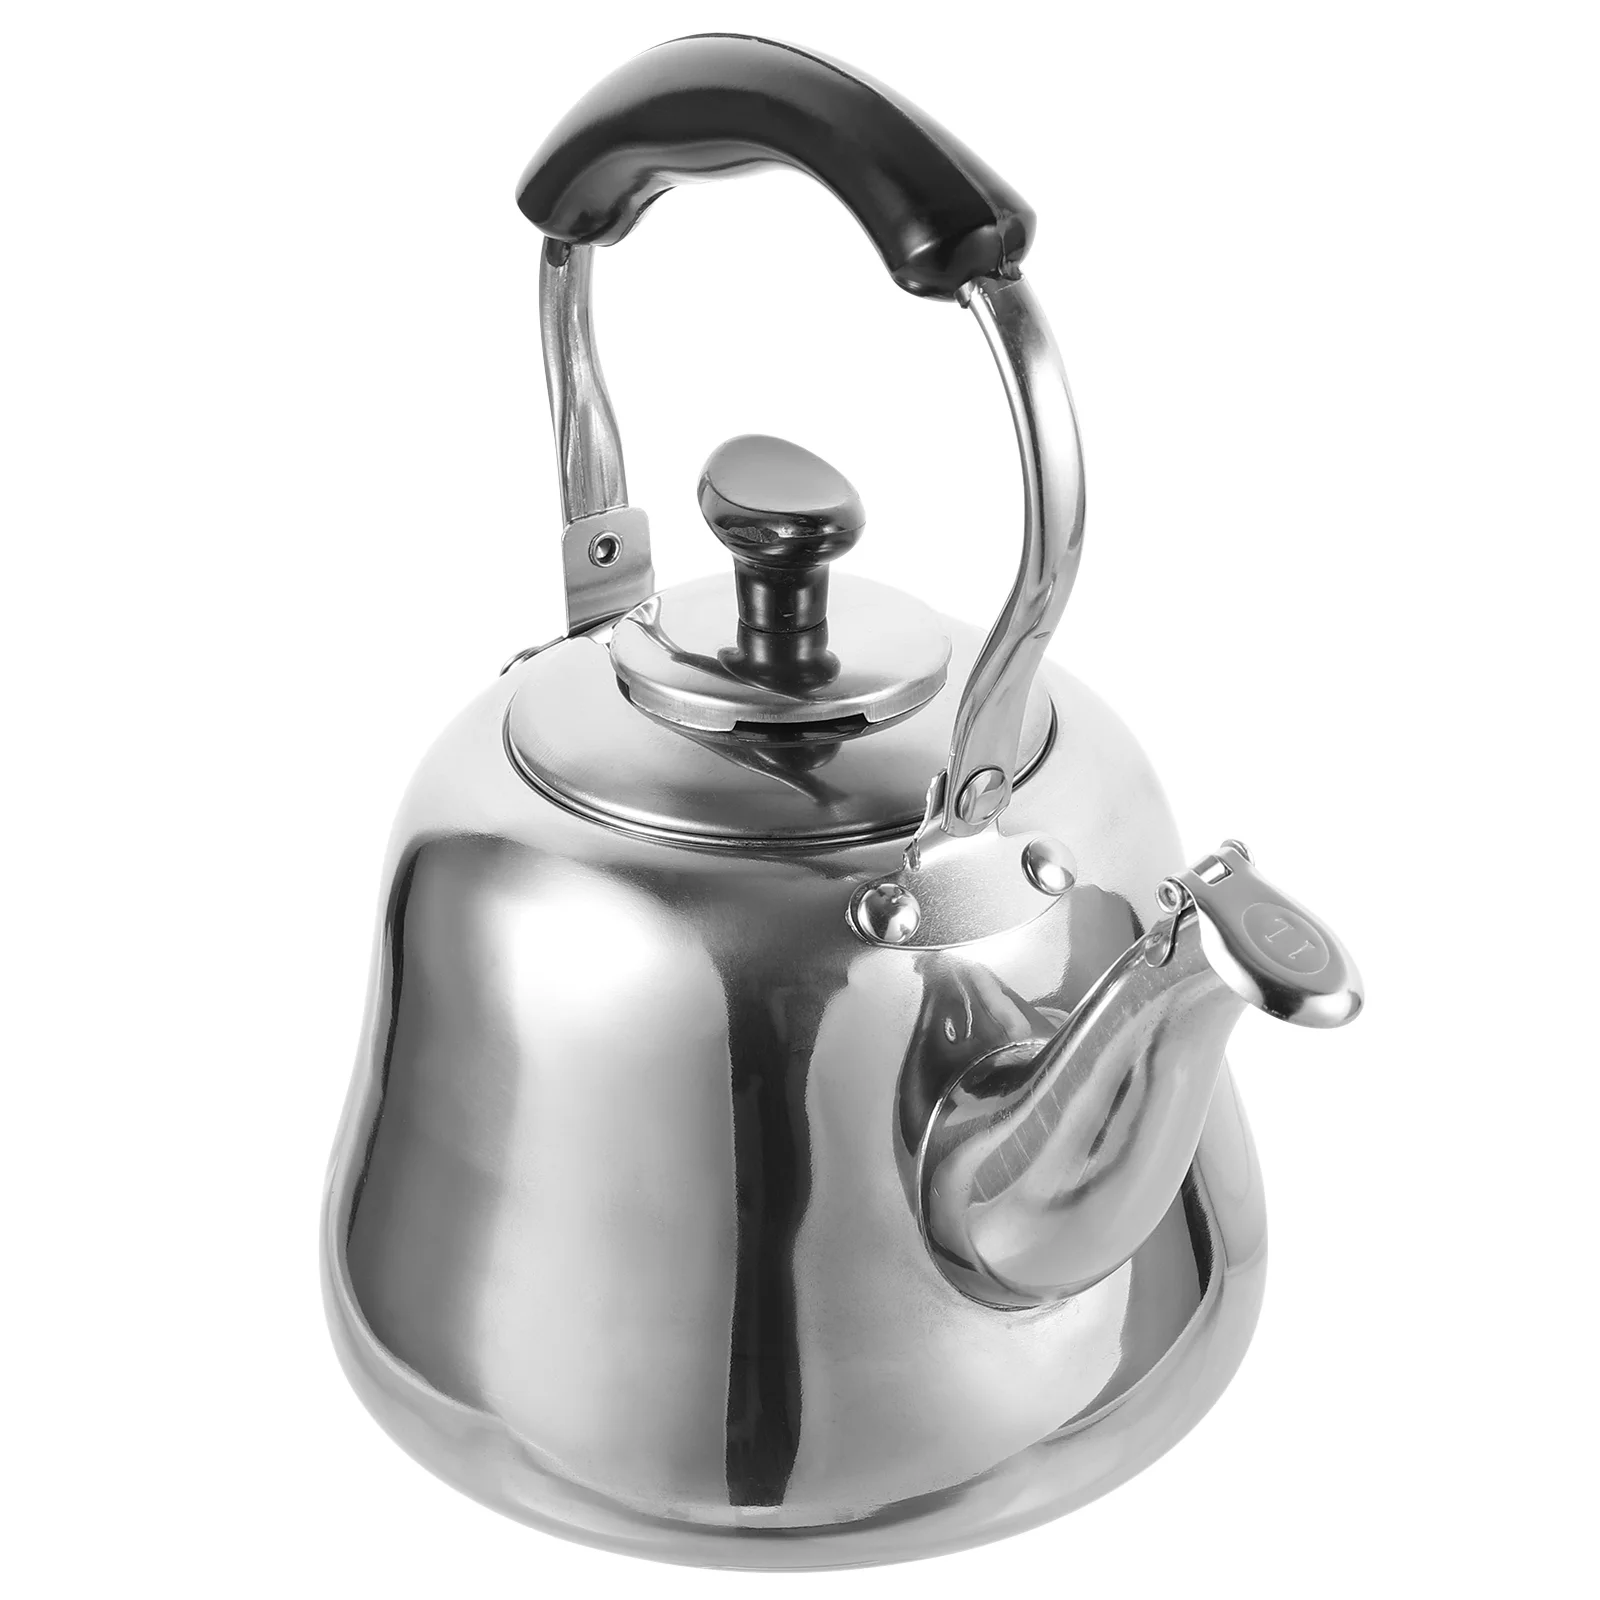 

Kettle Tea Whistling Water Teapot Steel Stainless Stovetop Stove Pot Boiling Coffee Gas Kettles Teakettle Hot Camping Boil